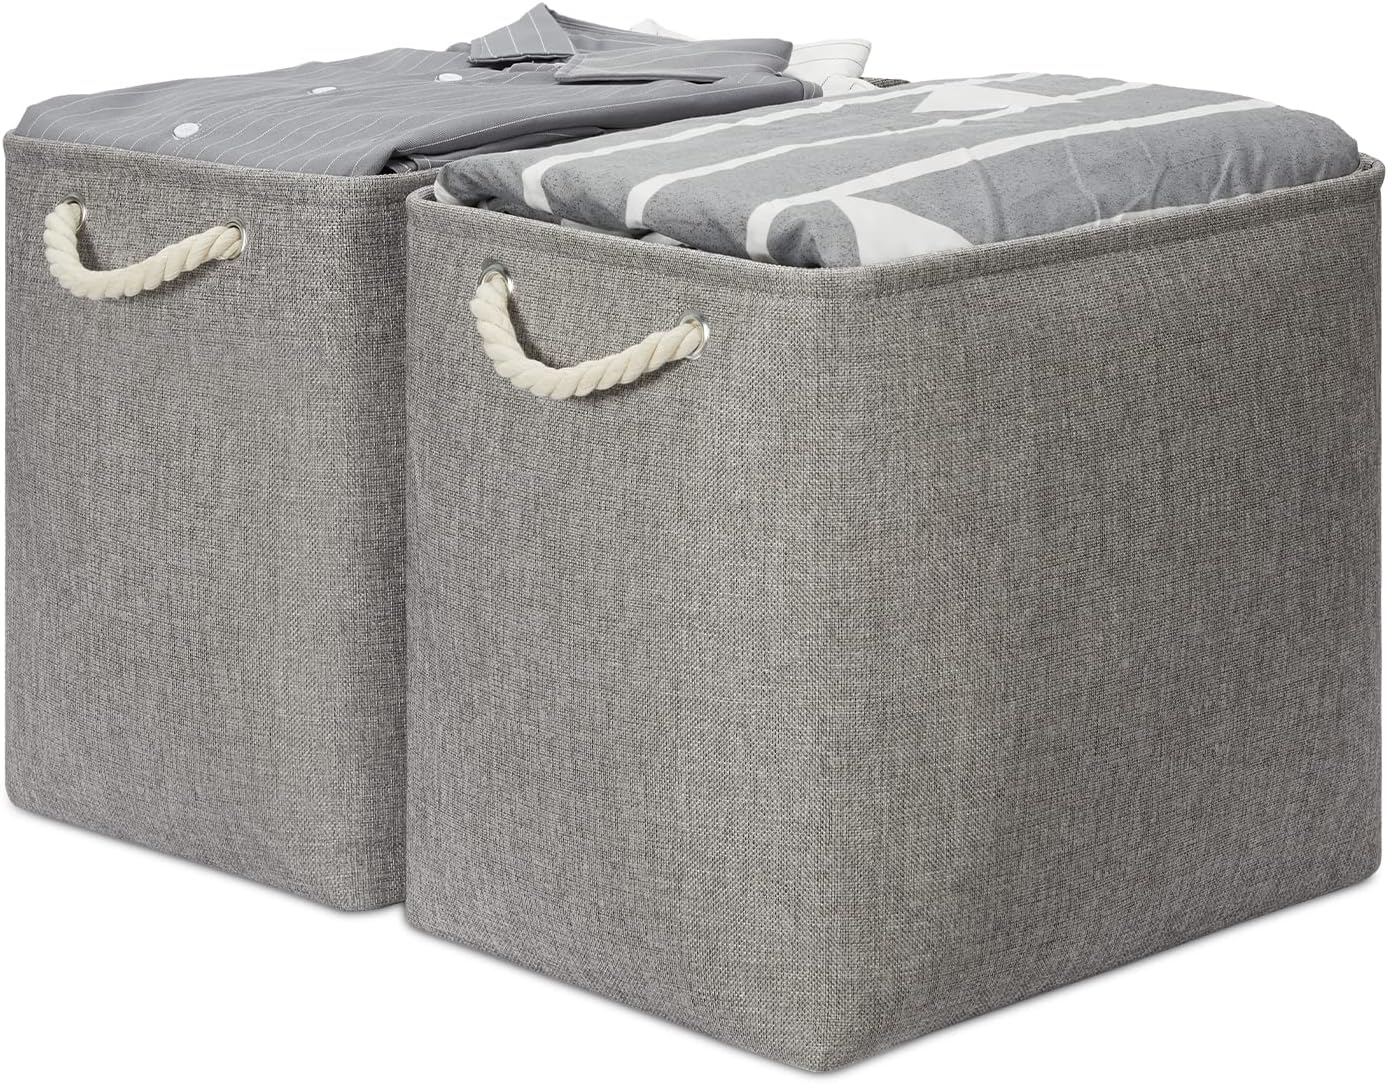 Temary Large Storage Baskets for Organizing Blankets, 2PCs Cloth Fabric Baskets for Shelves, Decorative Rectangular Baskets with Handle for Storage Toys, Books (Grey, 17Lx12Wx15H Inches)